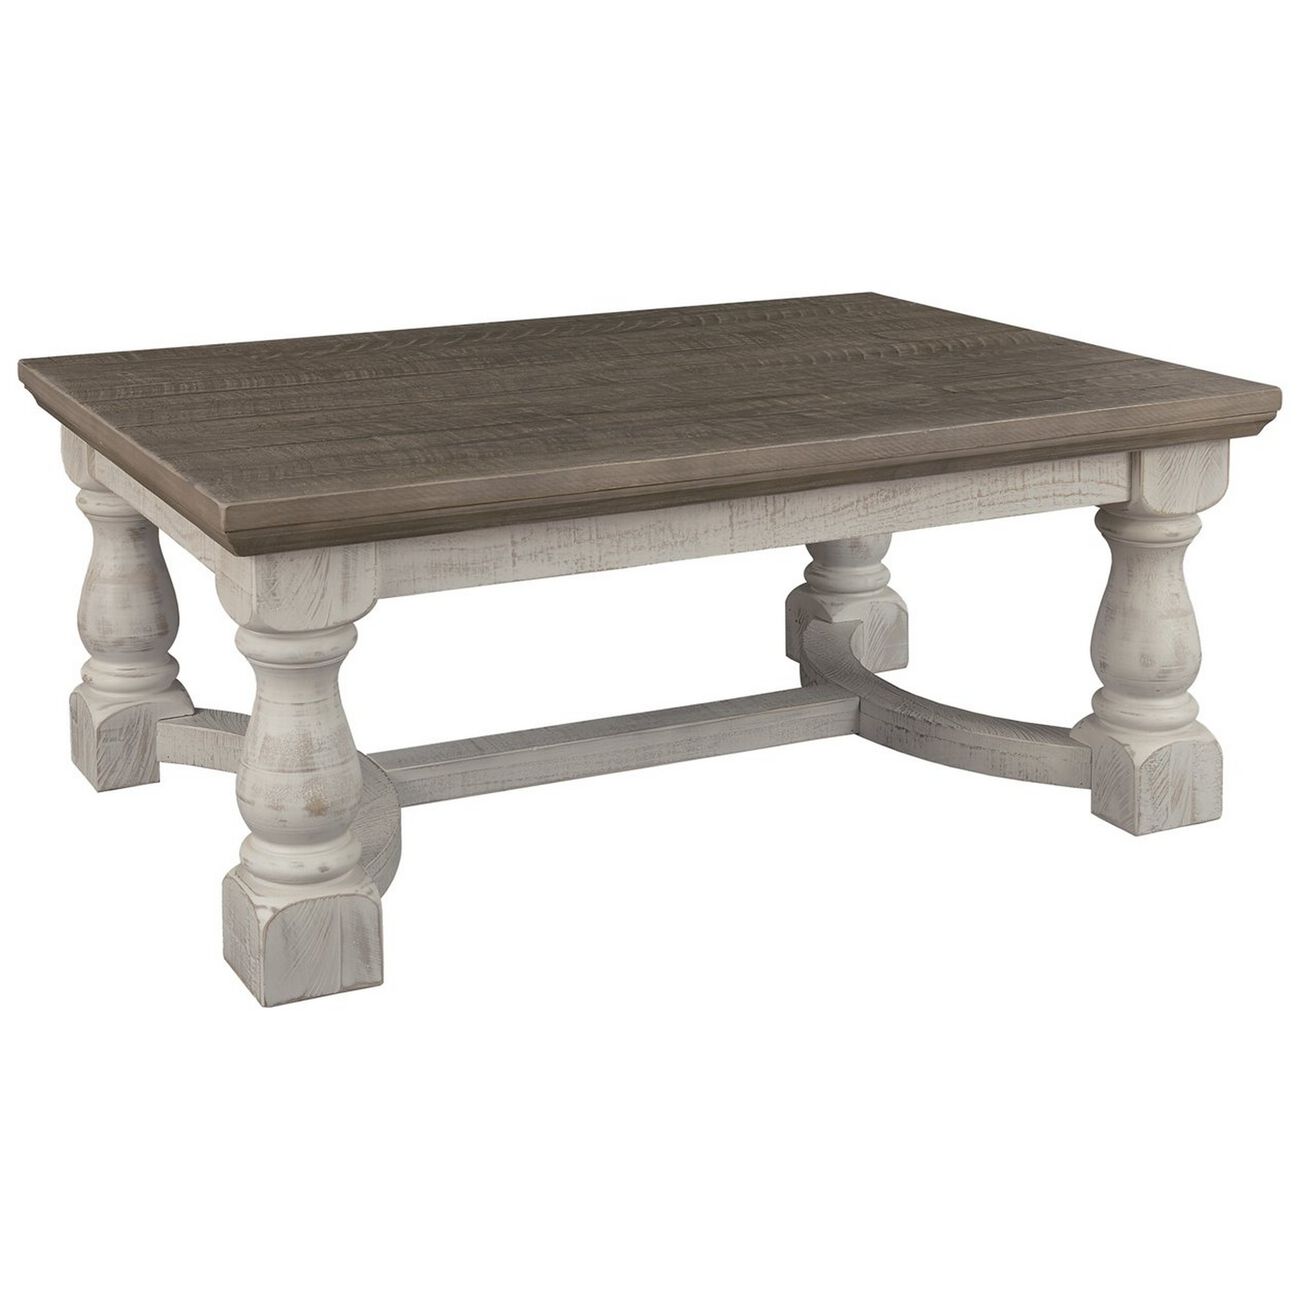 Rectangular Wooden Cocktail Table with Trestle Base,Brown and Antique White